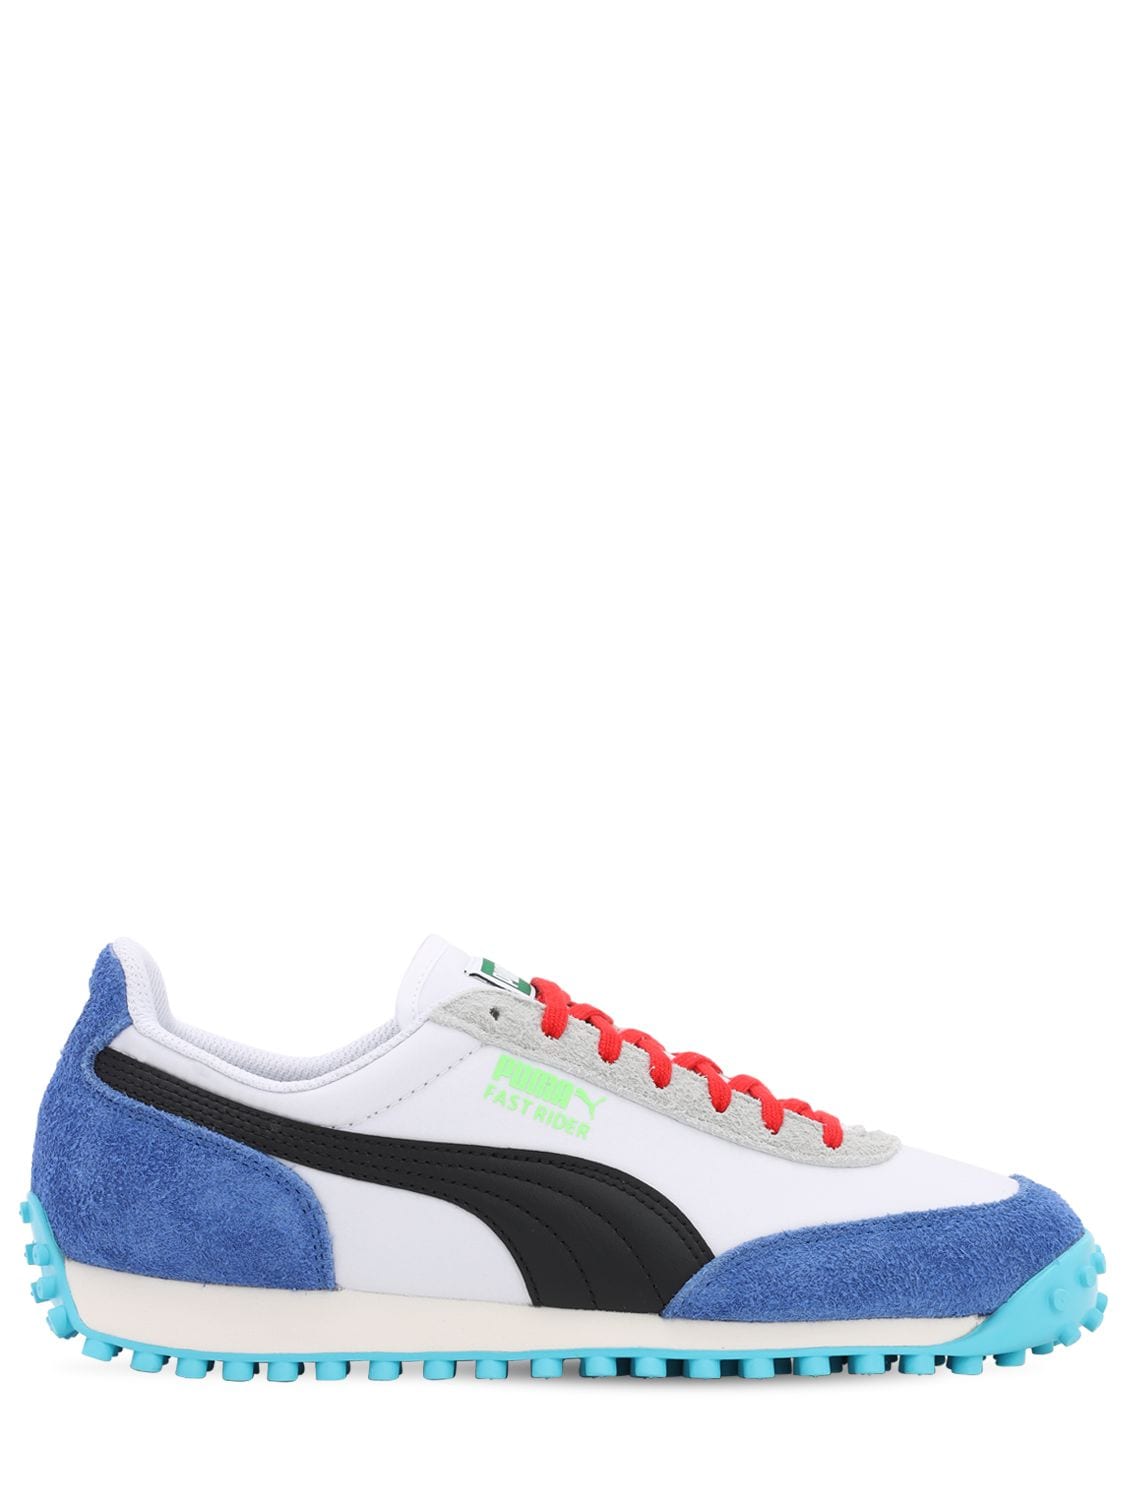 PUMA FAST RIDER RIDE ON SNEAKERS,71IWX6022-MDE1